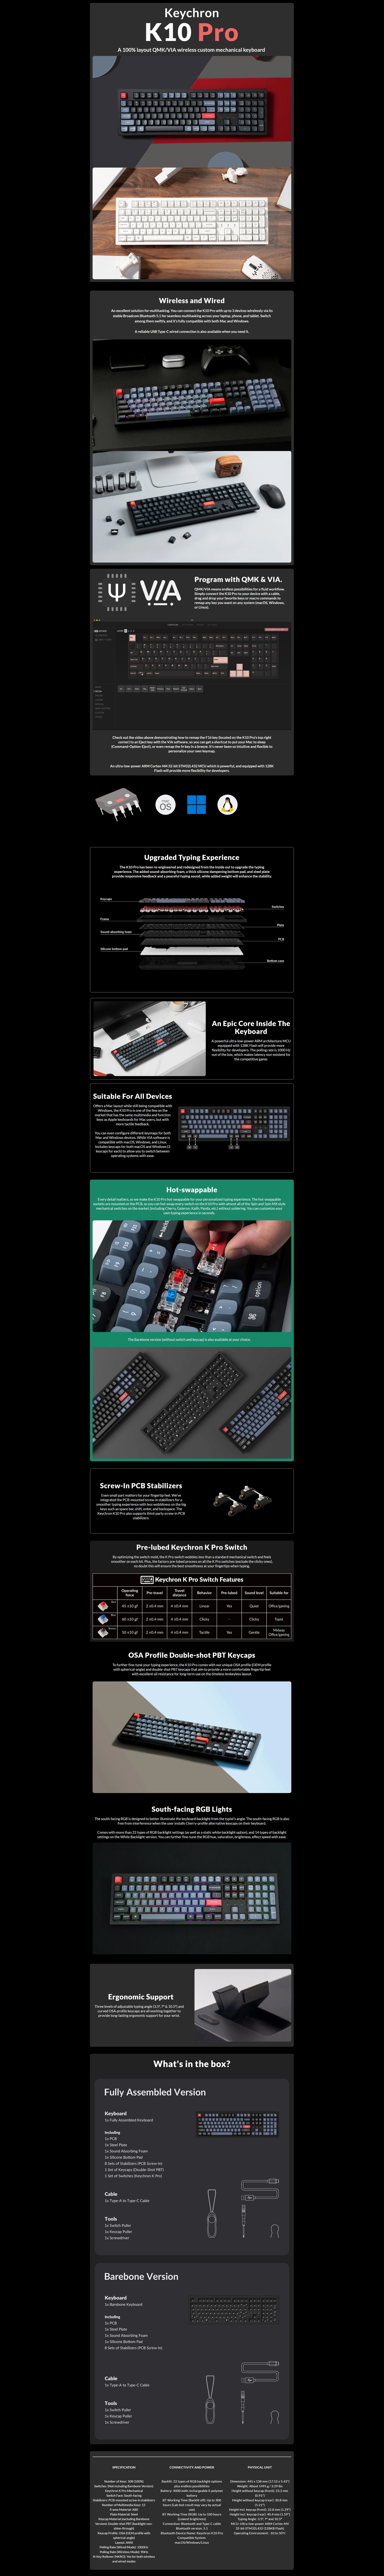 A large marketing image providing additional information about the product Keychron K10 Pro QMK/VIA Wireless Mechanical Keyboard Black (Brown Switch) - Additional alt info not provided